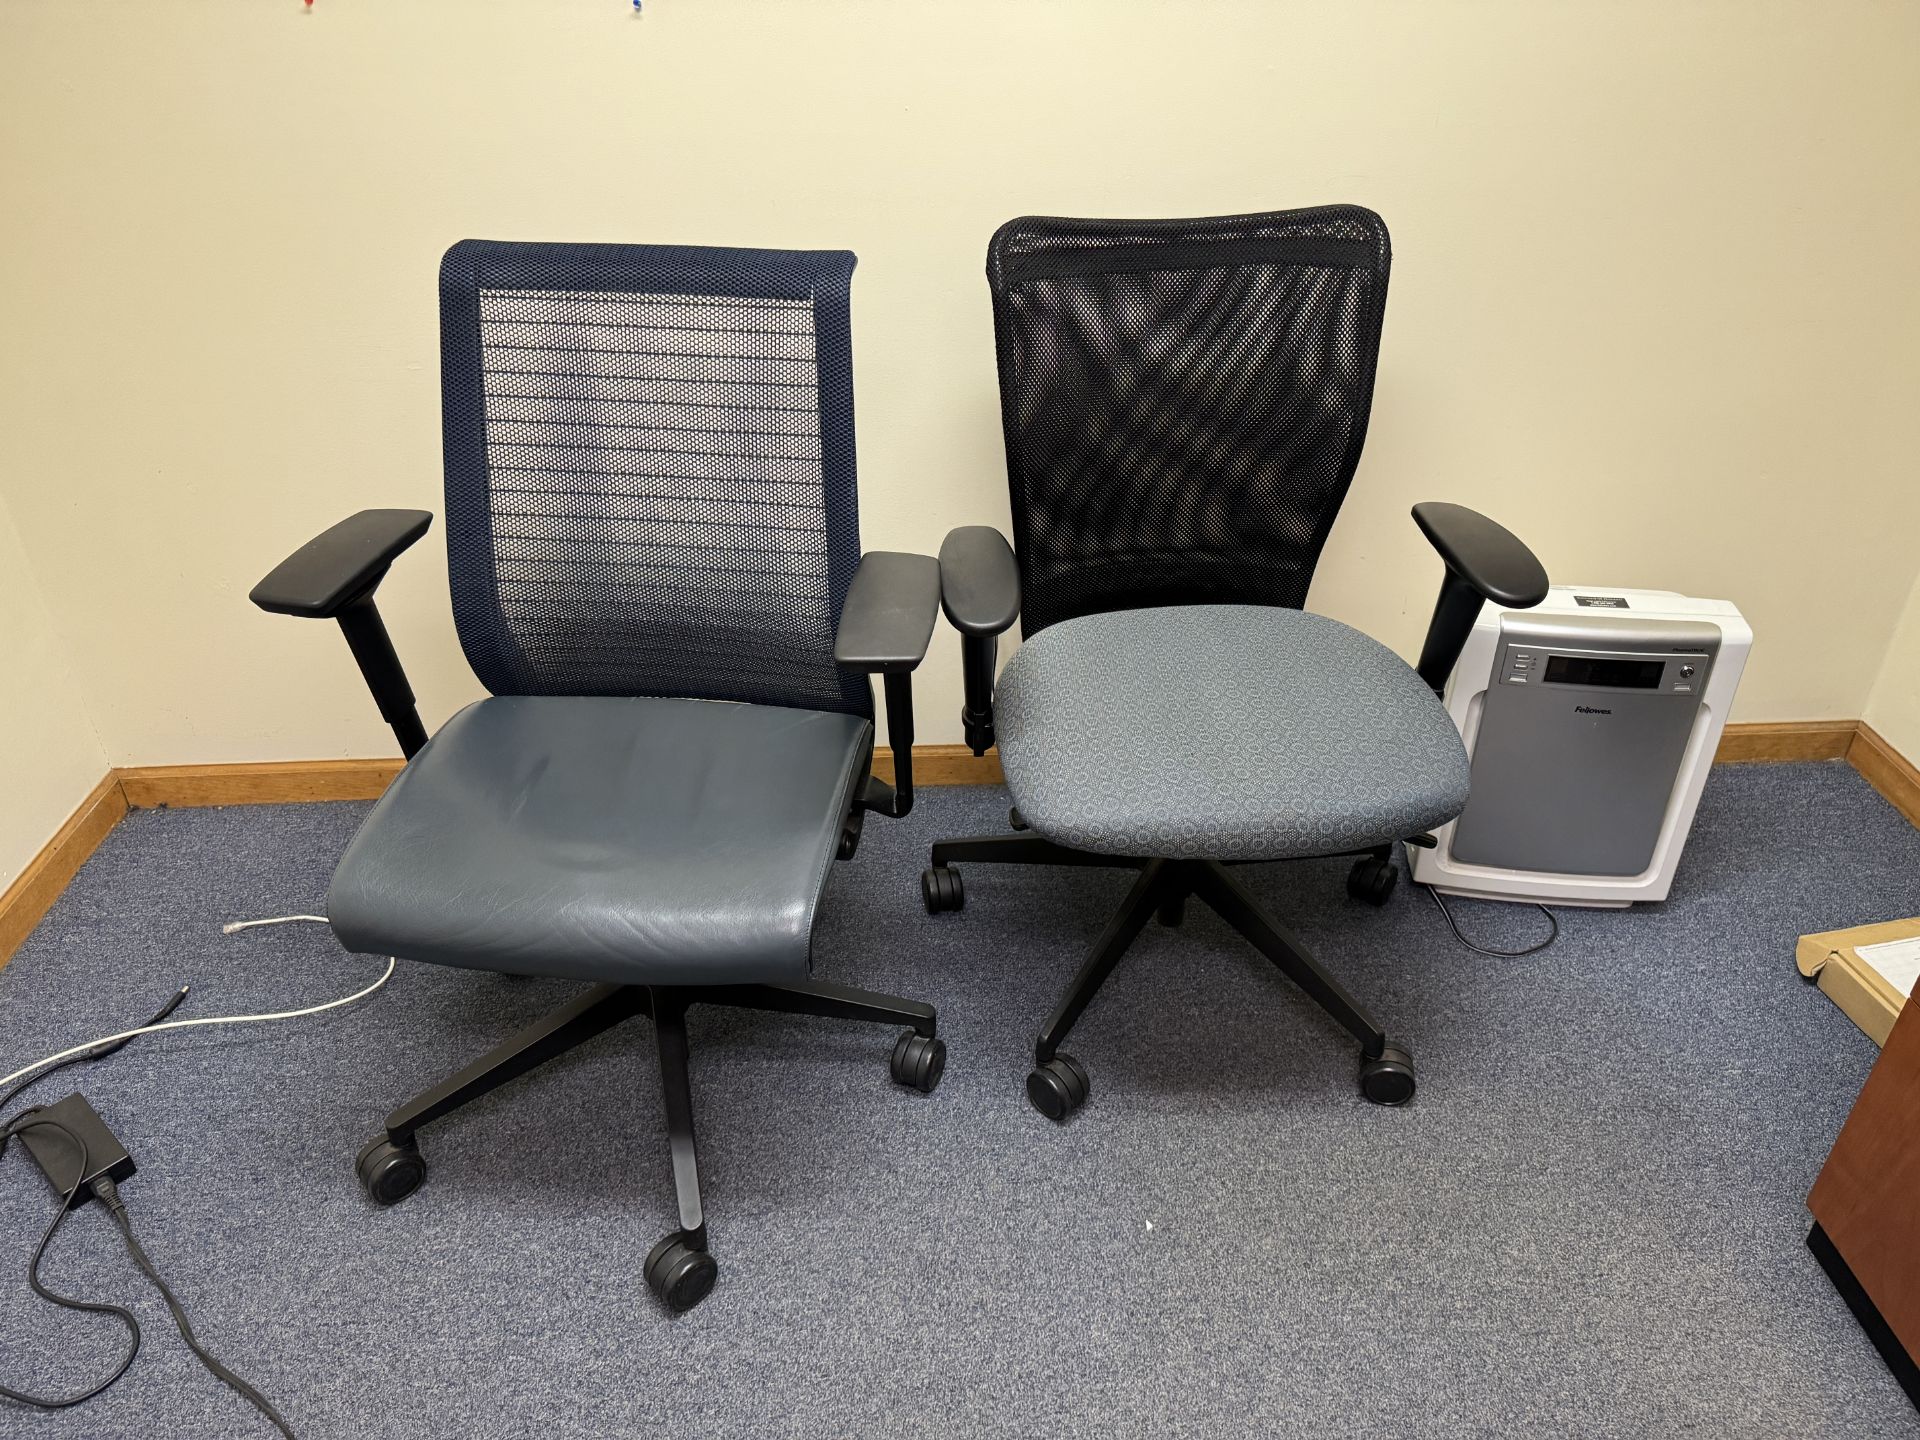 CONTENTS OF OFFICE: DESK; (2) CHAIRS; SPACE HEATER (PICTURED CONTENTS OF DESK NOT INCLUDED) - Image 3 of 3